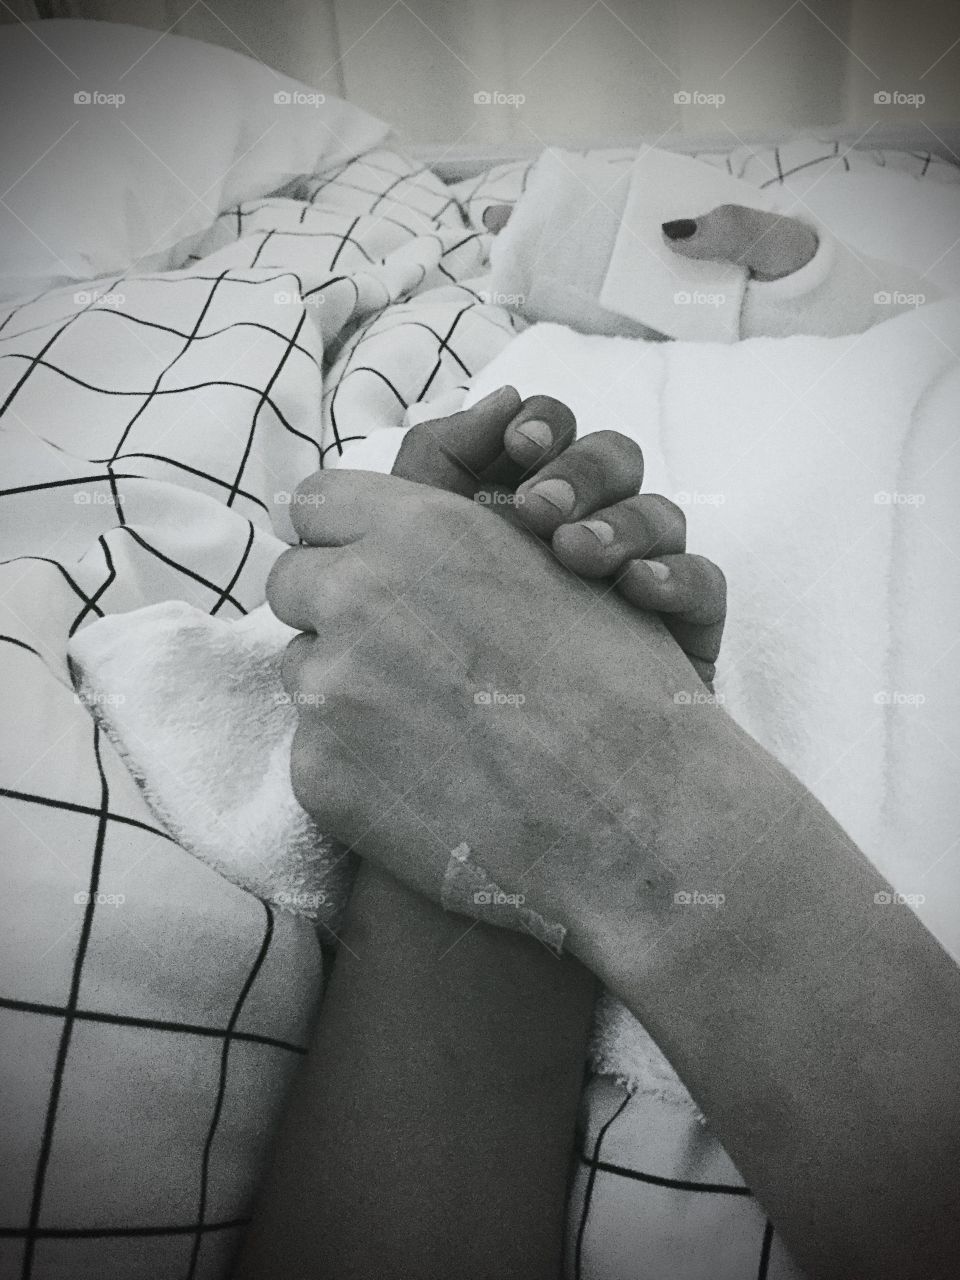 Sometimes all you need is someone to hold your hand.